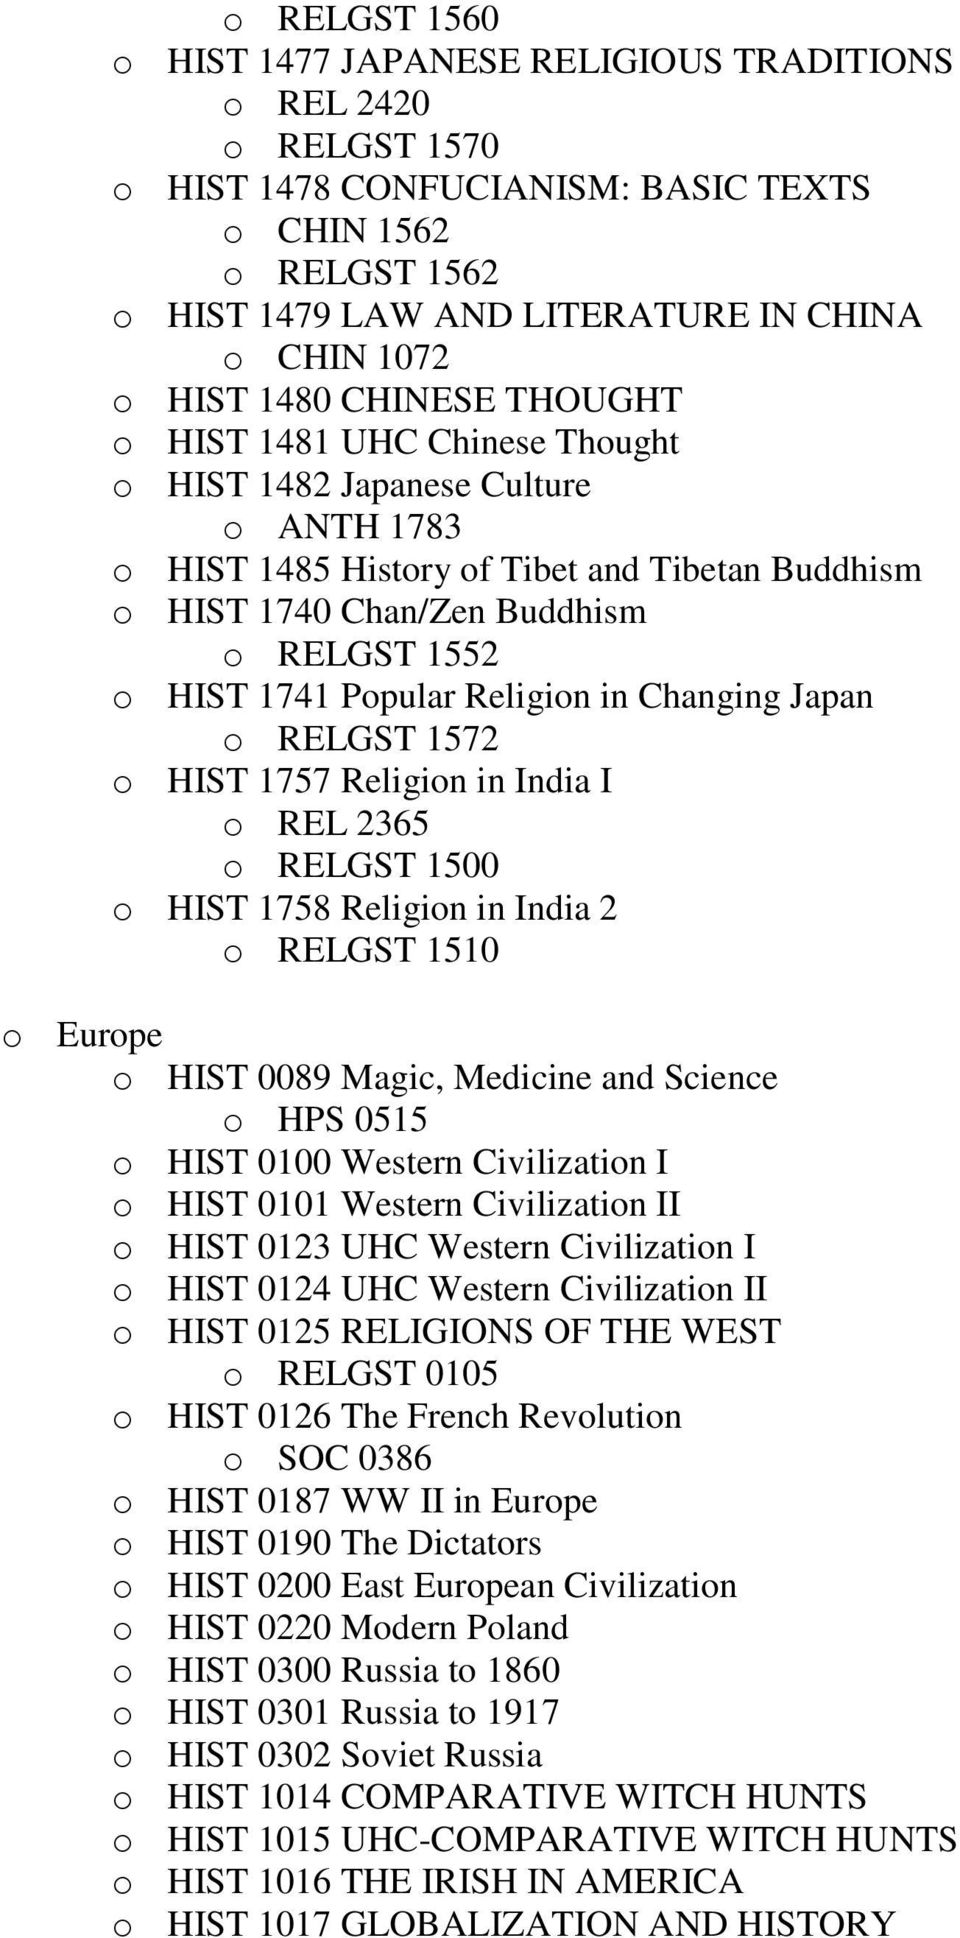 1741 Popular Religion in Changing Japan o RELGST 1572 o HIST 1757 Religion in India I o REL 2365 o RELGST 1500 o HIST 1758 Religion in India 2 o RELGST 1510 o Europe o HIST 0089 Magic, Medicine and